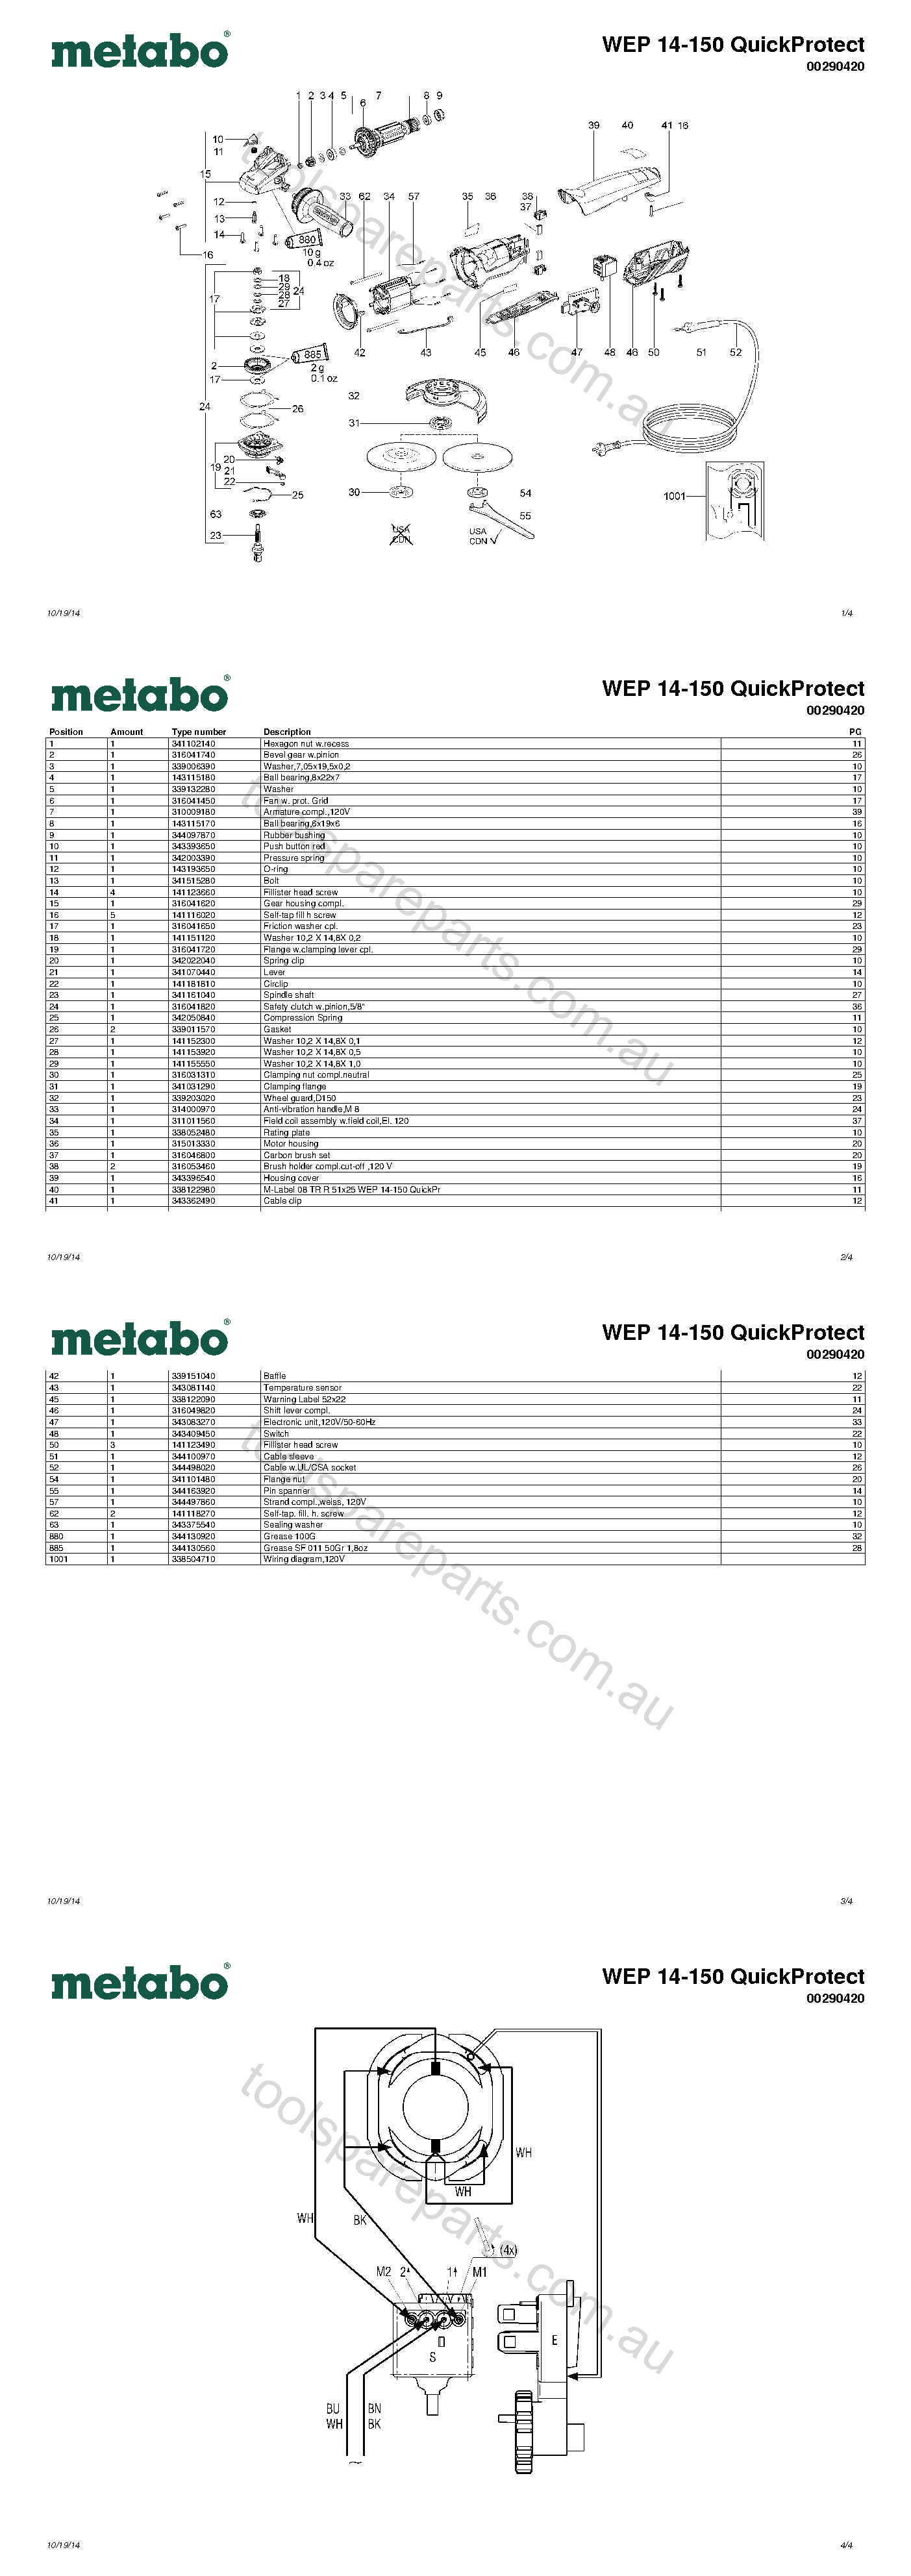 Metabo WEP 14-150 QuickProtect 00290420  Diagram 1